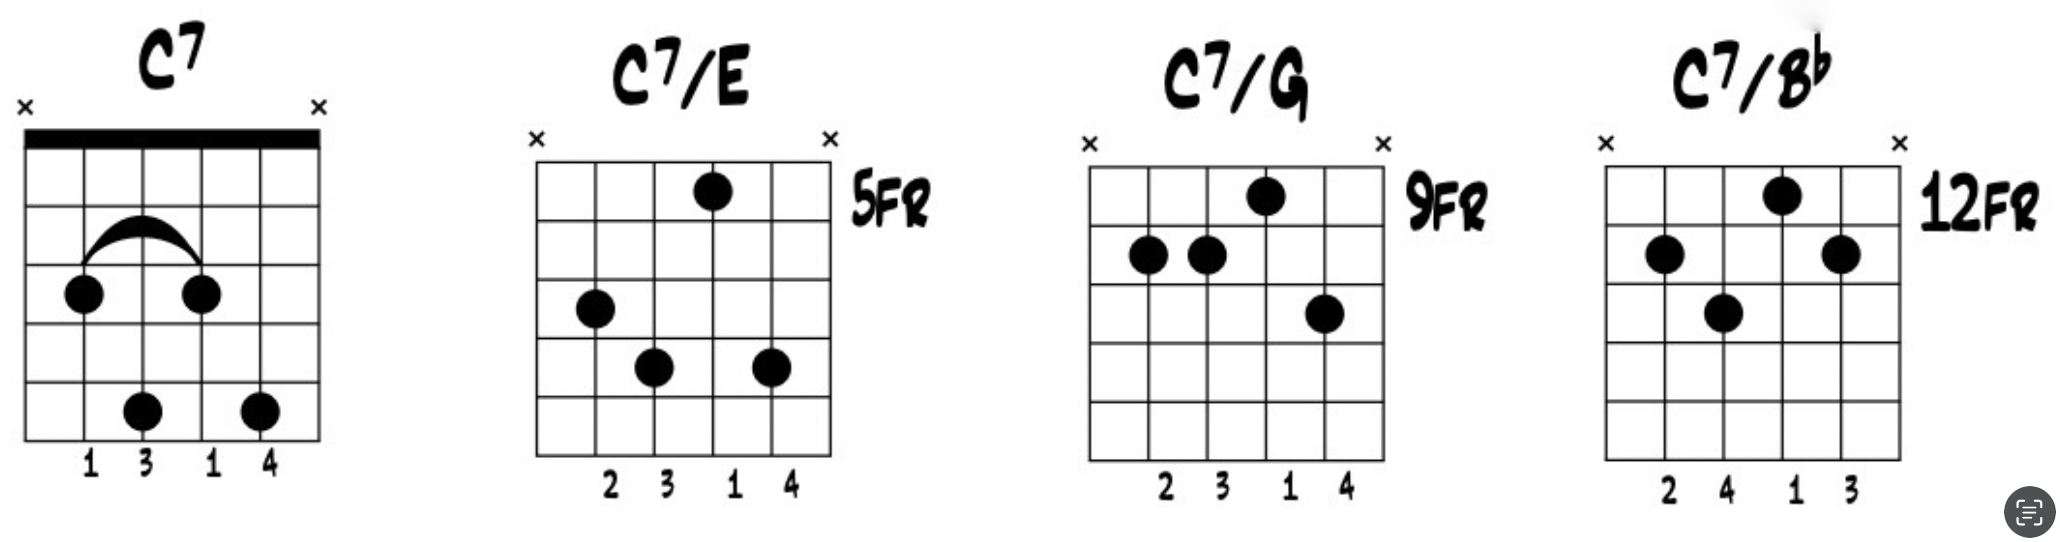 Jazz Guitar: C7 on the B String Group with all inversions